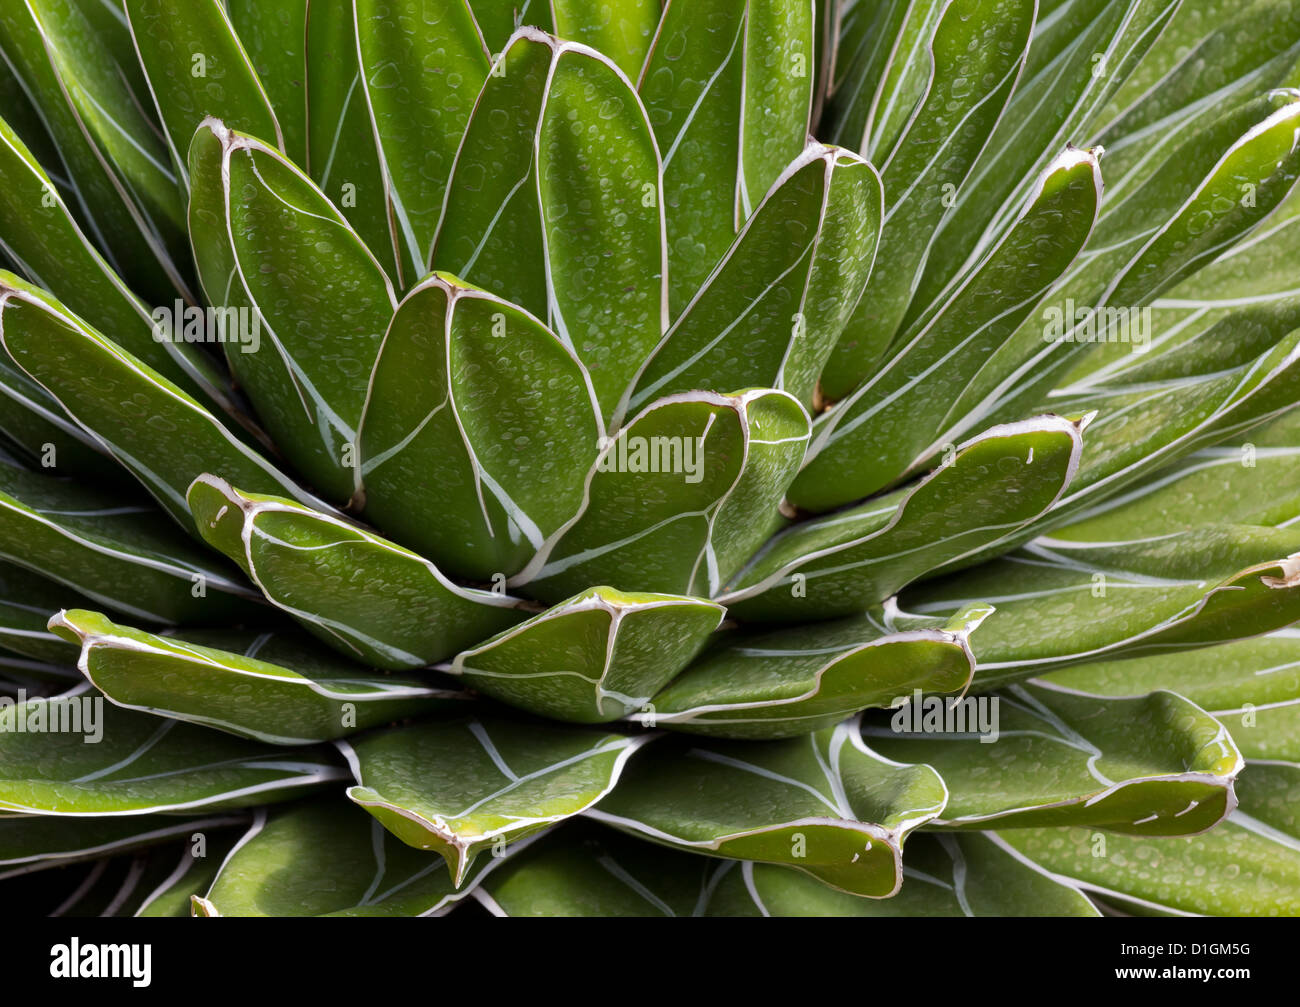 Details and Patterns of Green Hard Leafs Stock Photo